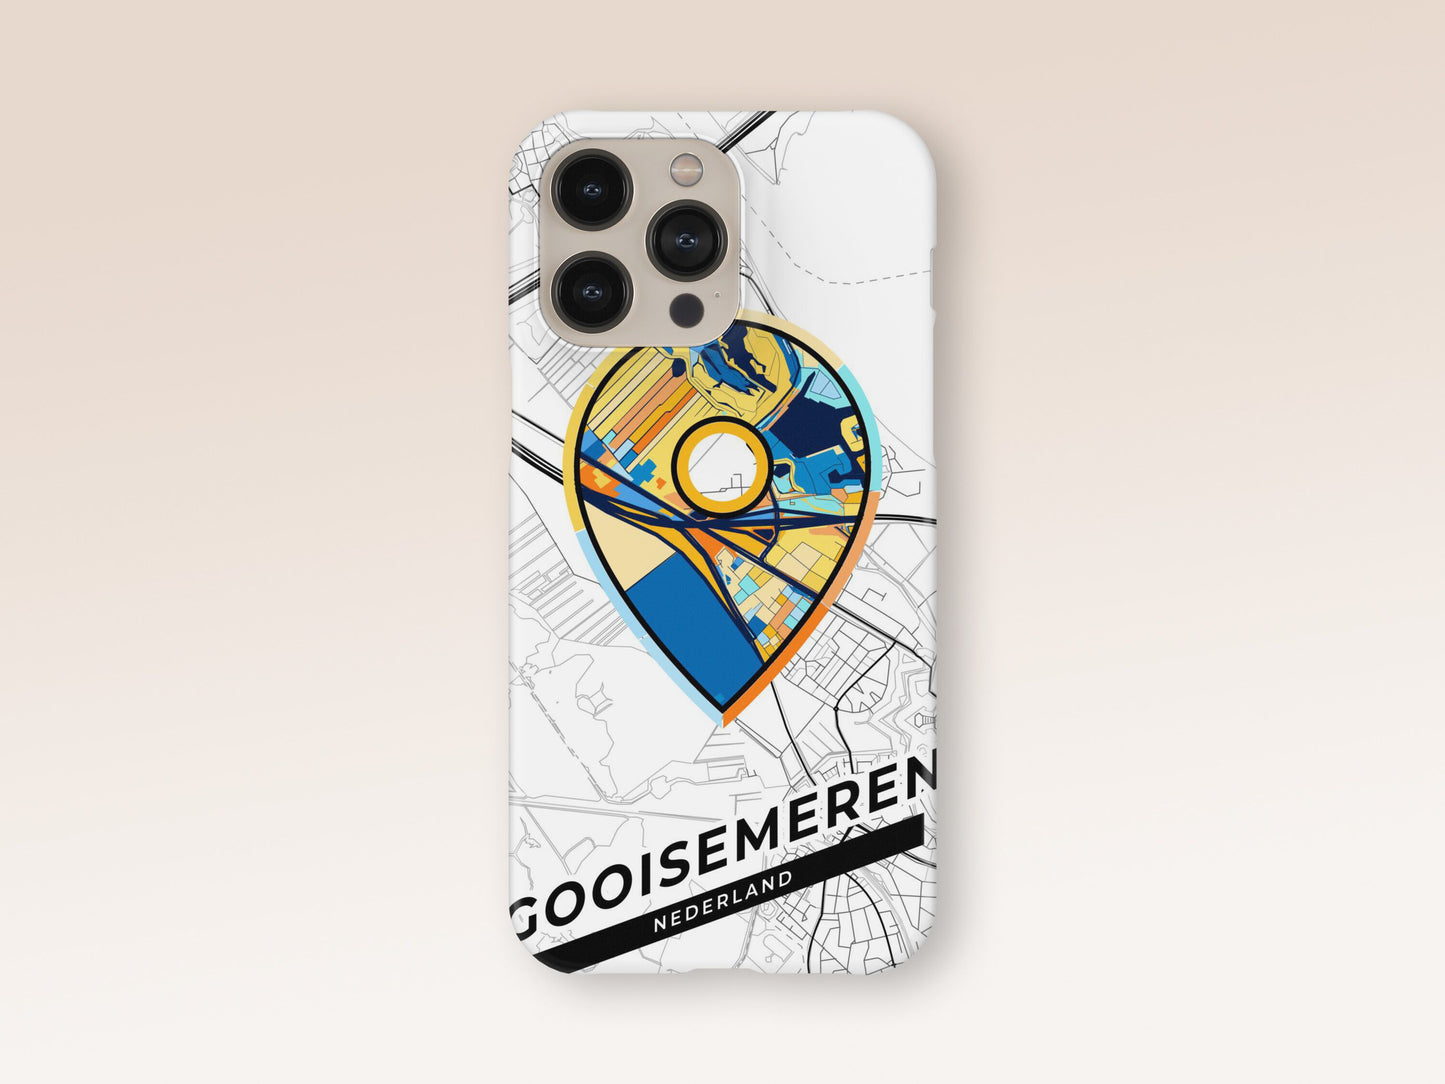 Gooise Meren Netherlands slim phone case with colorful icon. Birthday, wedding or housewarming gift. Couple match cases. 1